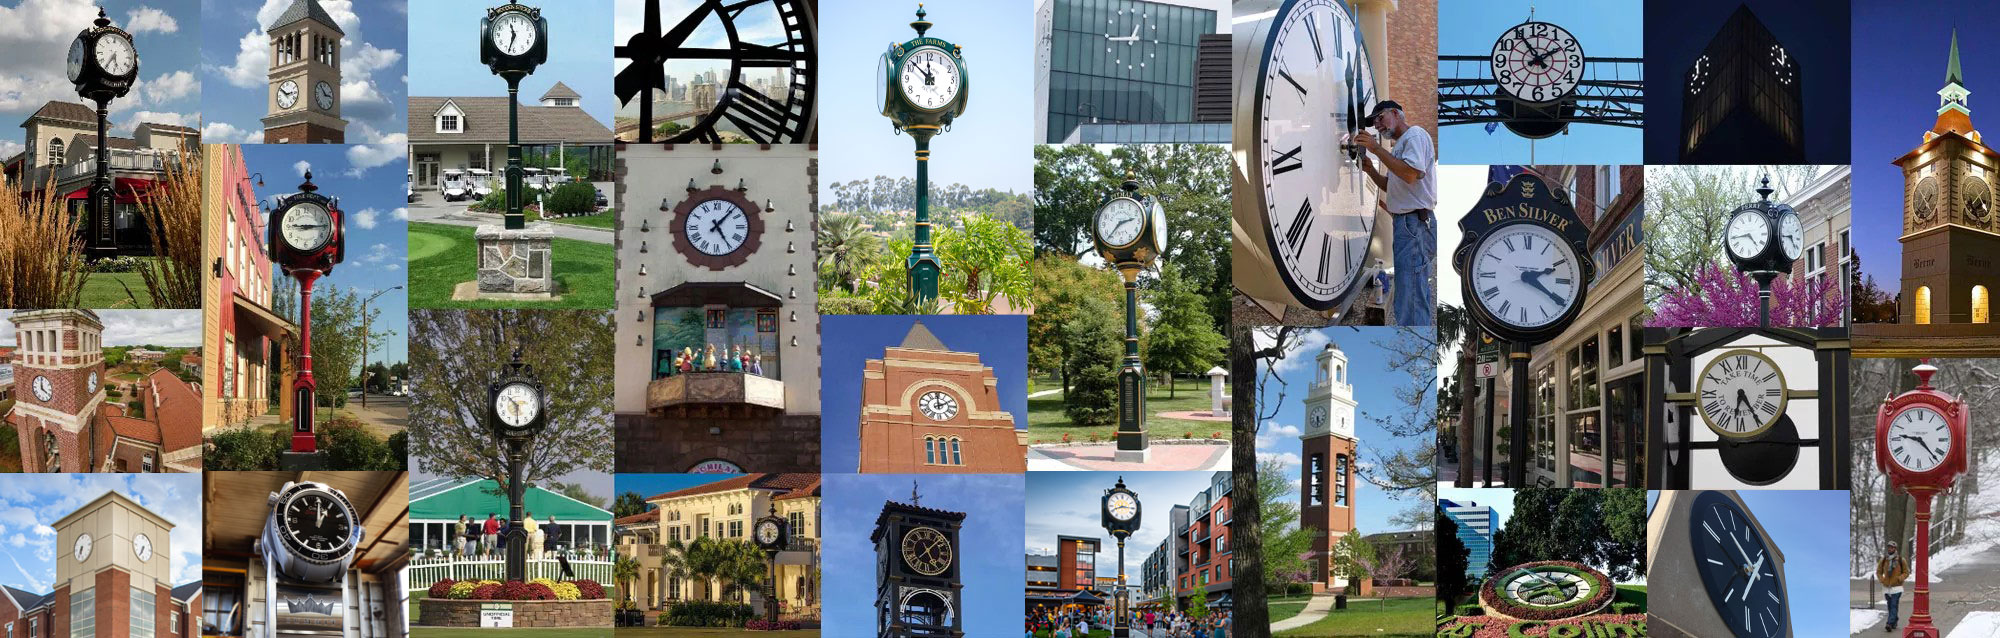 A photo collage of post clocks and tower clocks